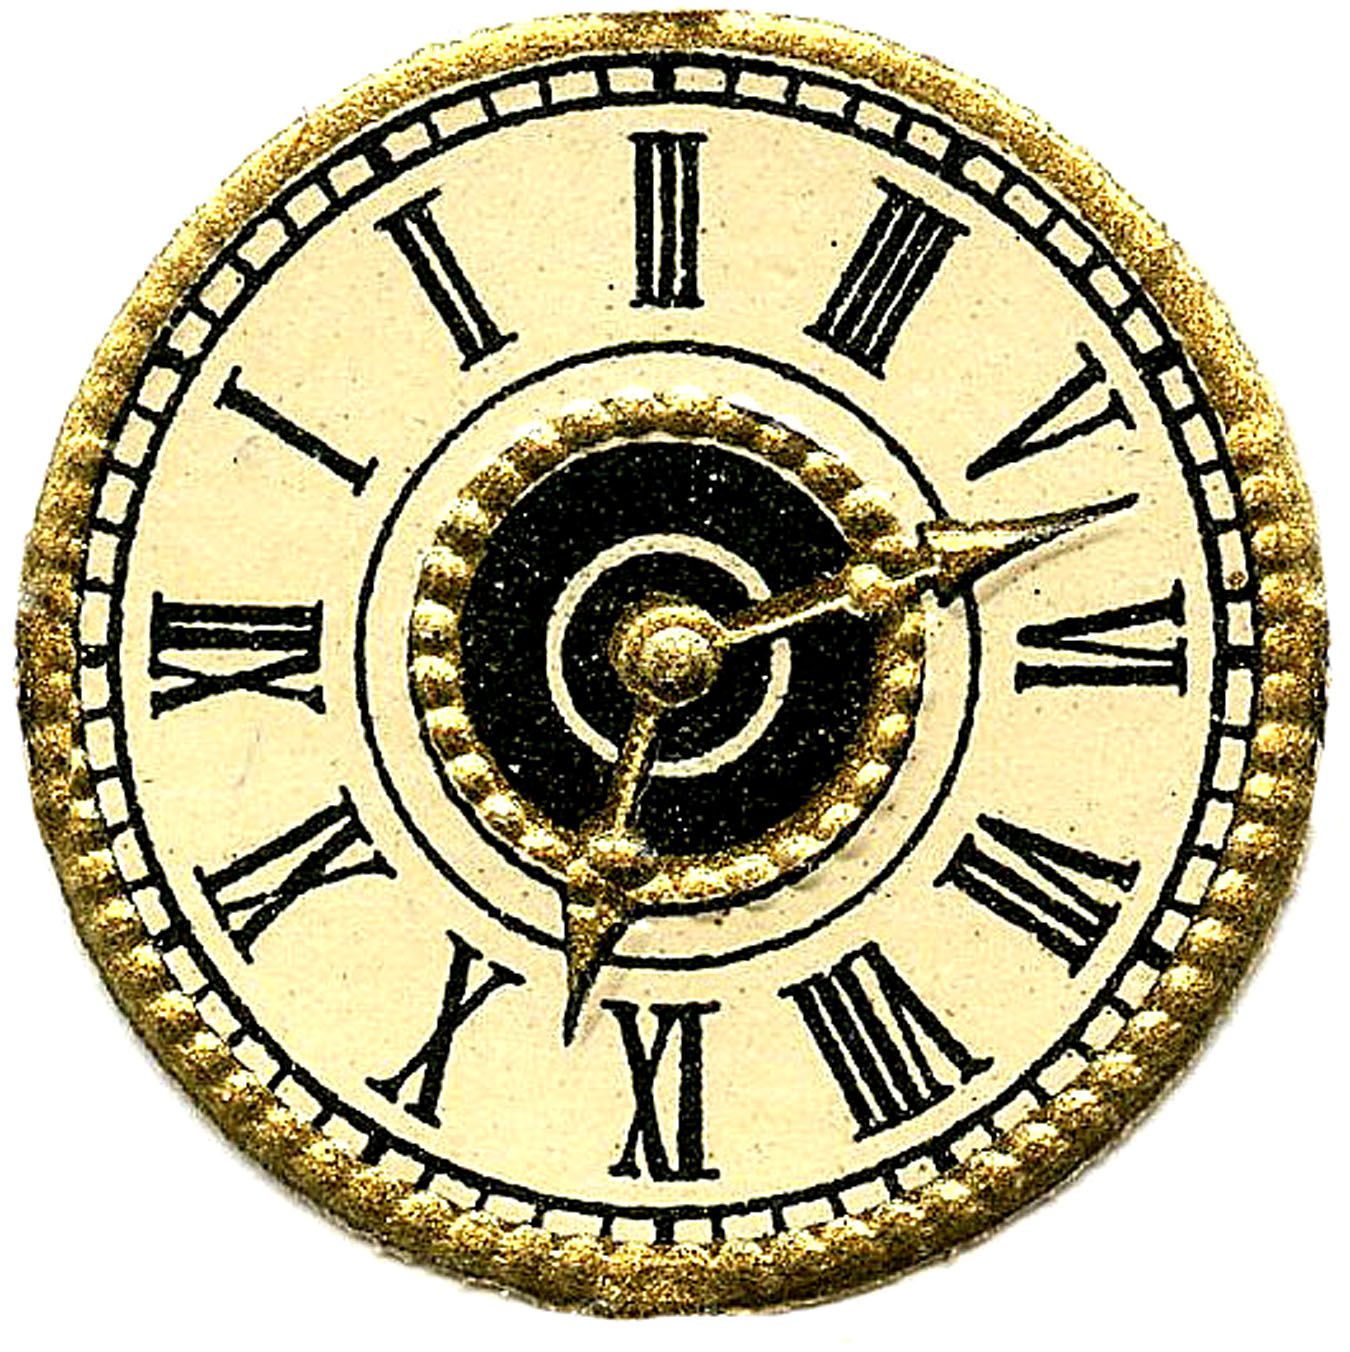 Clock face images.